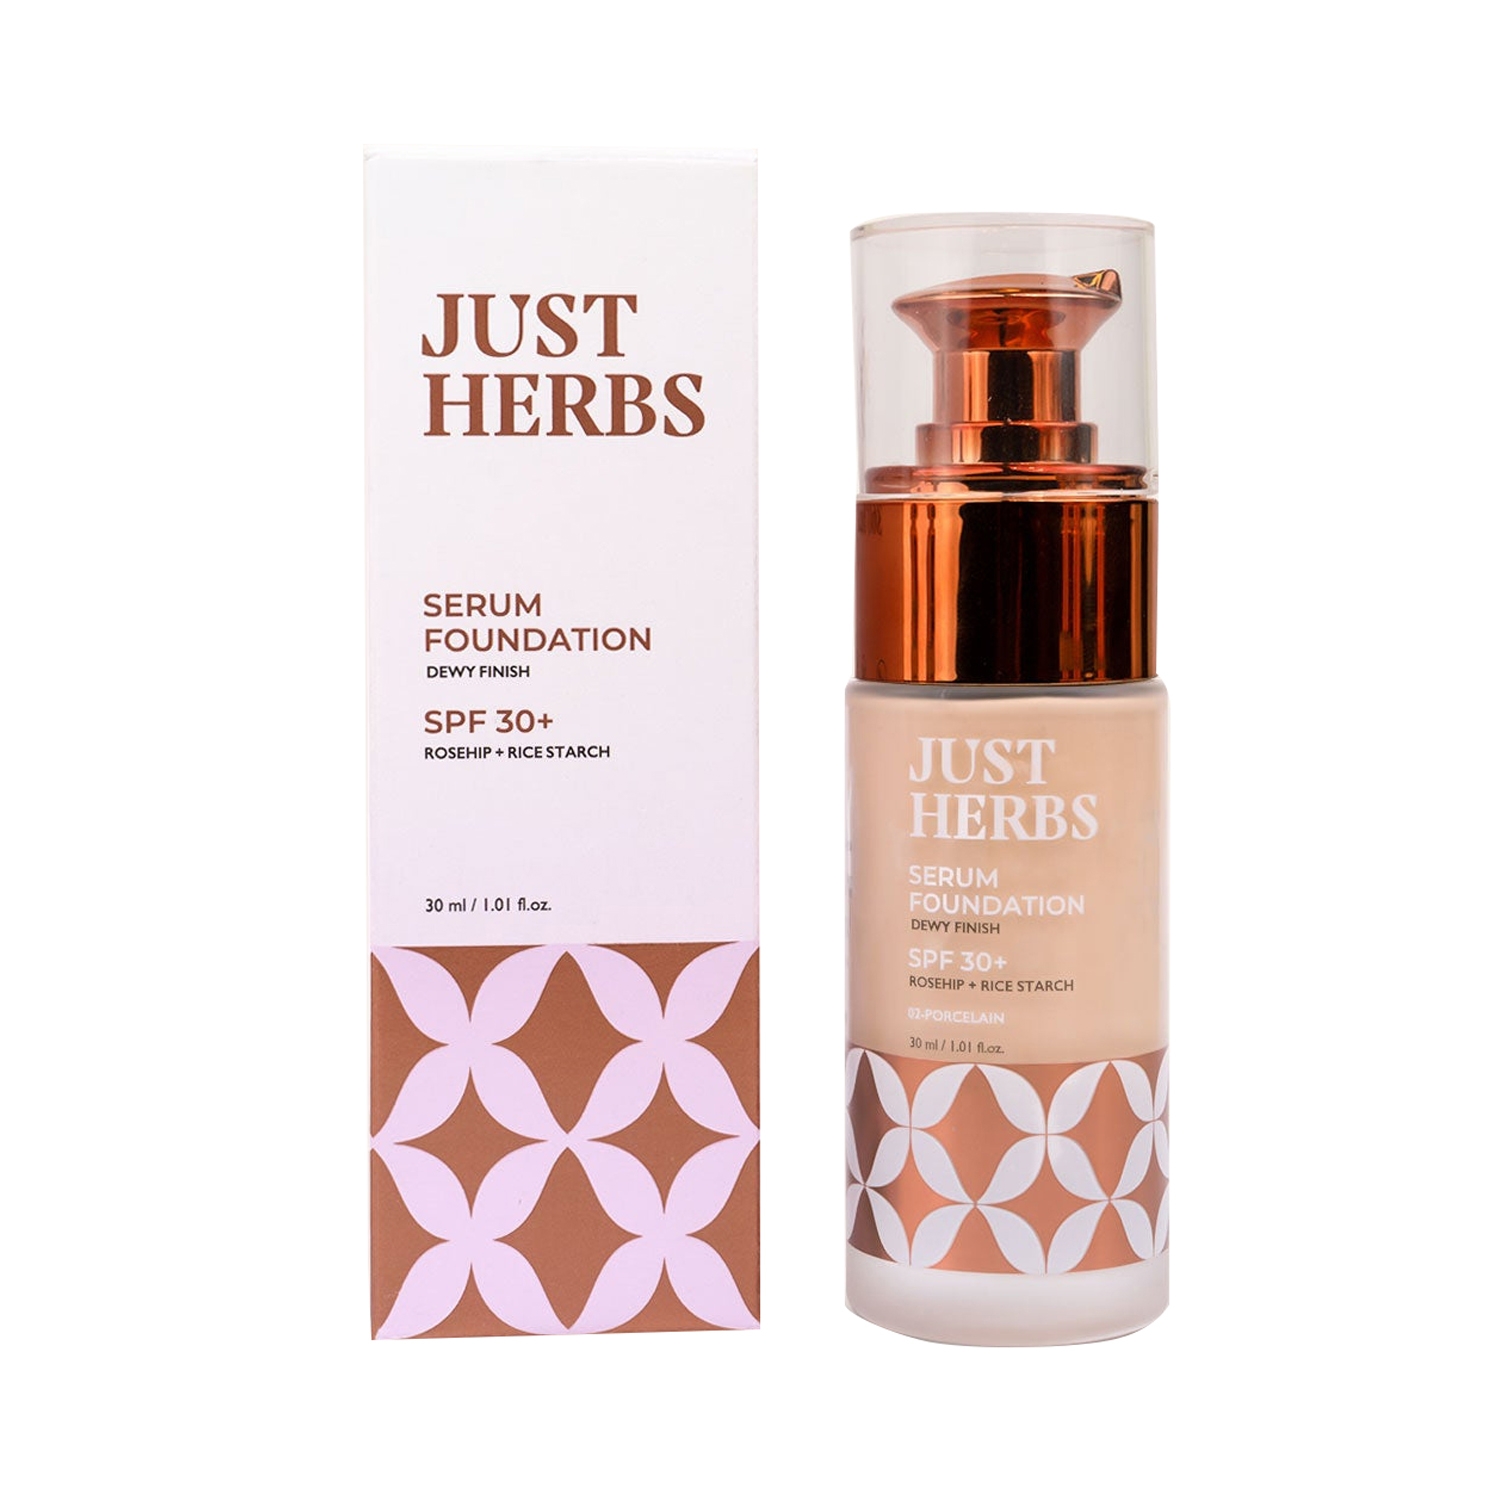 Just Herbs | Just Herbs Dewy Finish Serum Foundation SPF 30+ - 02 Porcelain (30ml)